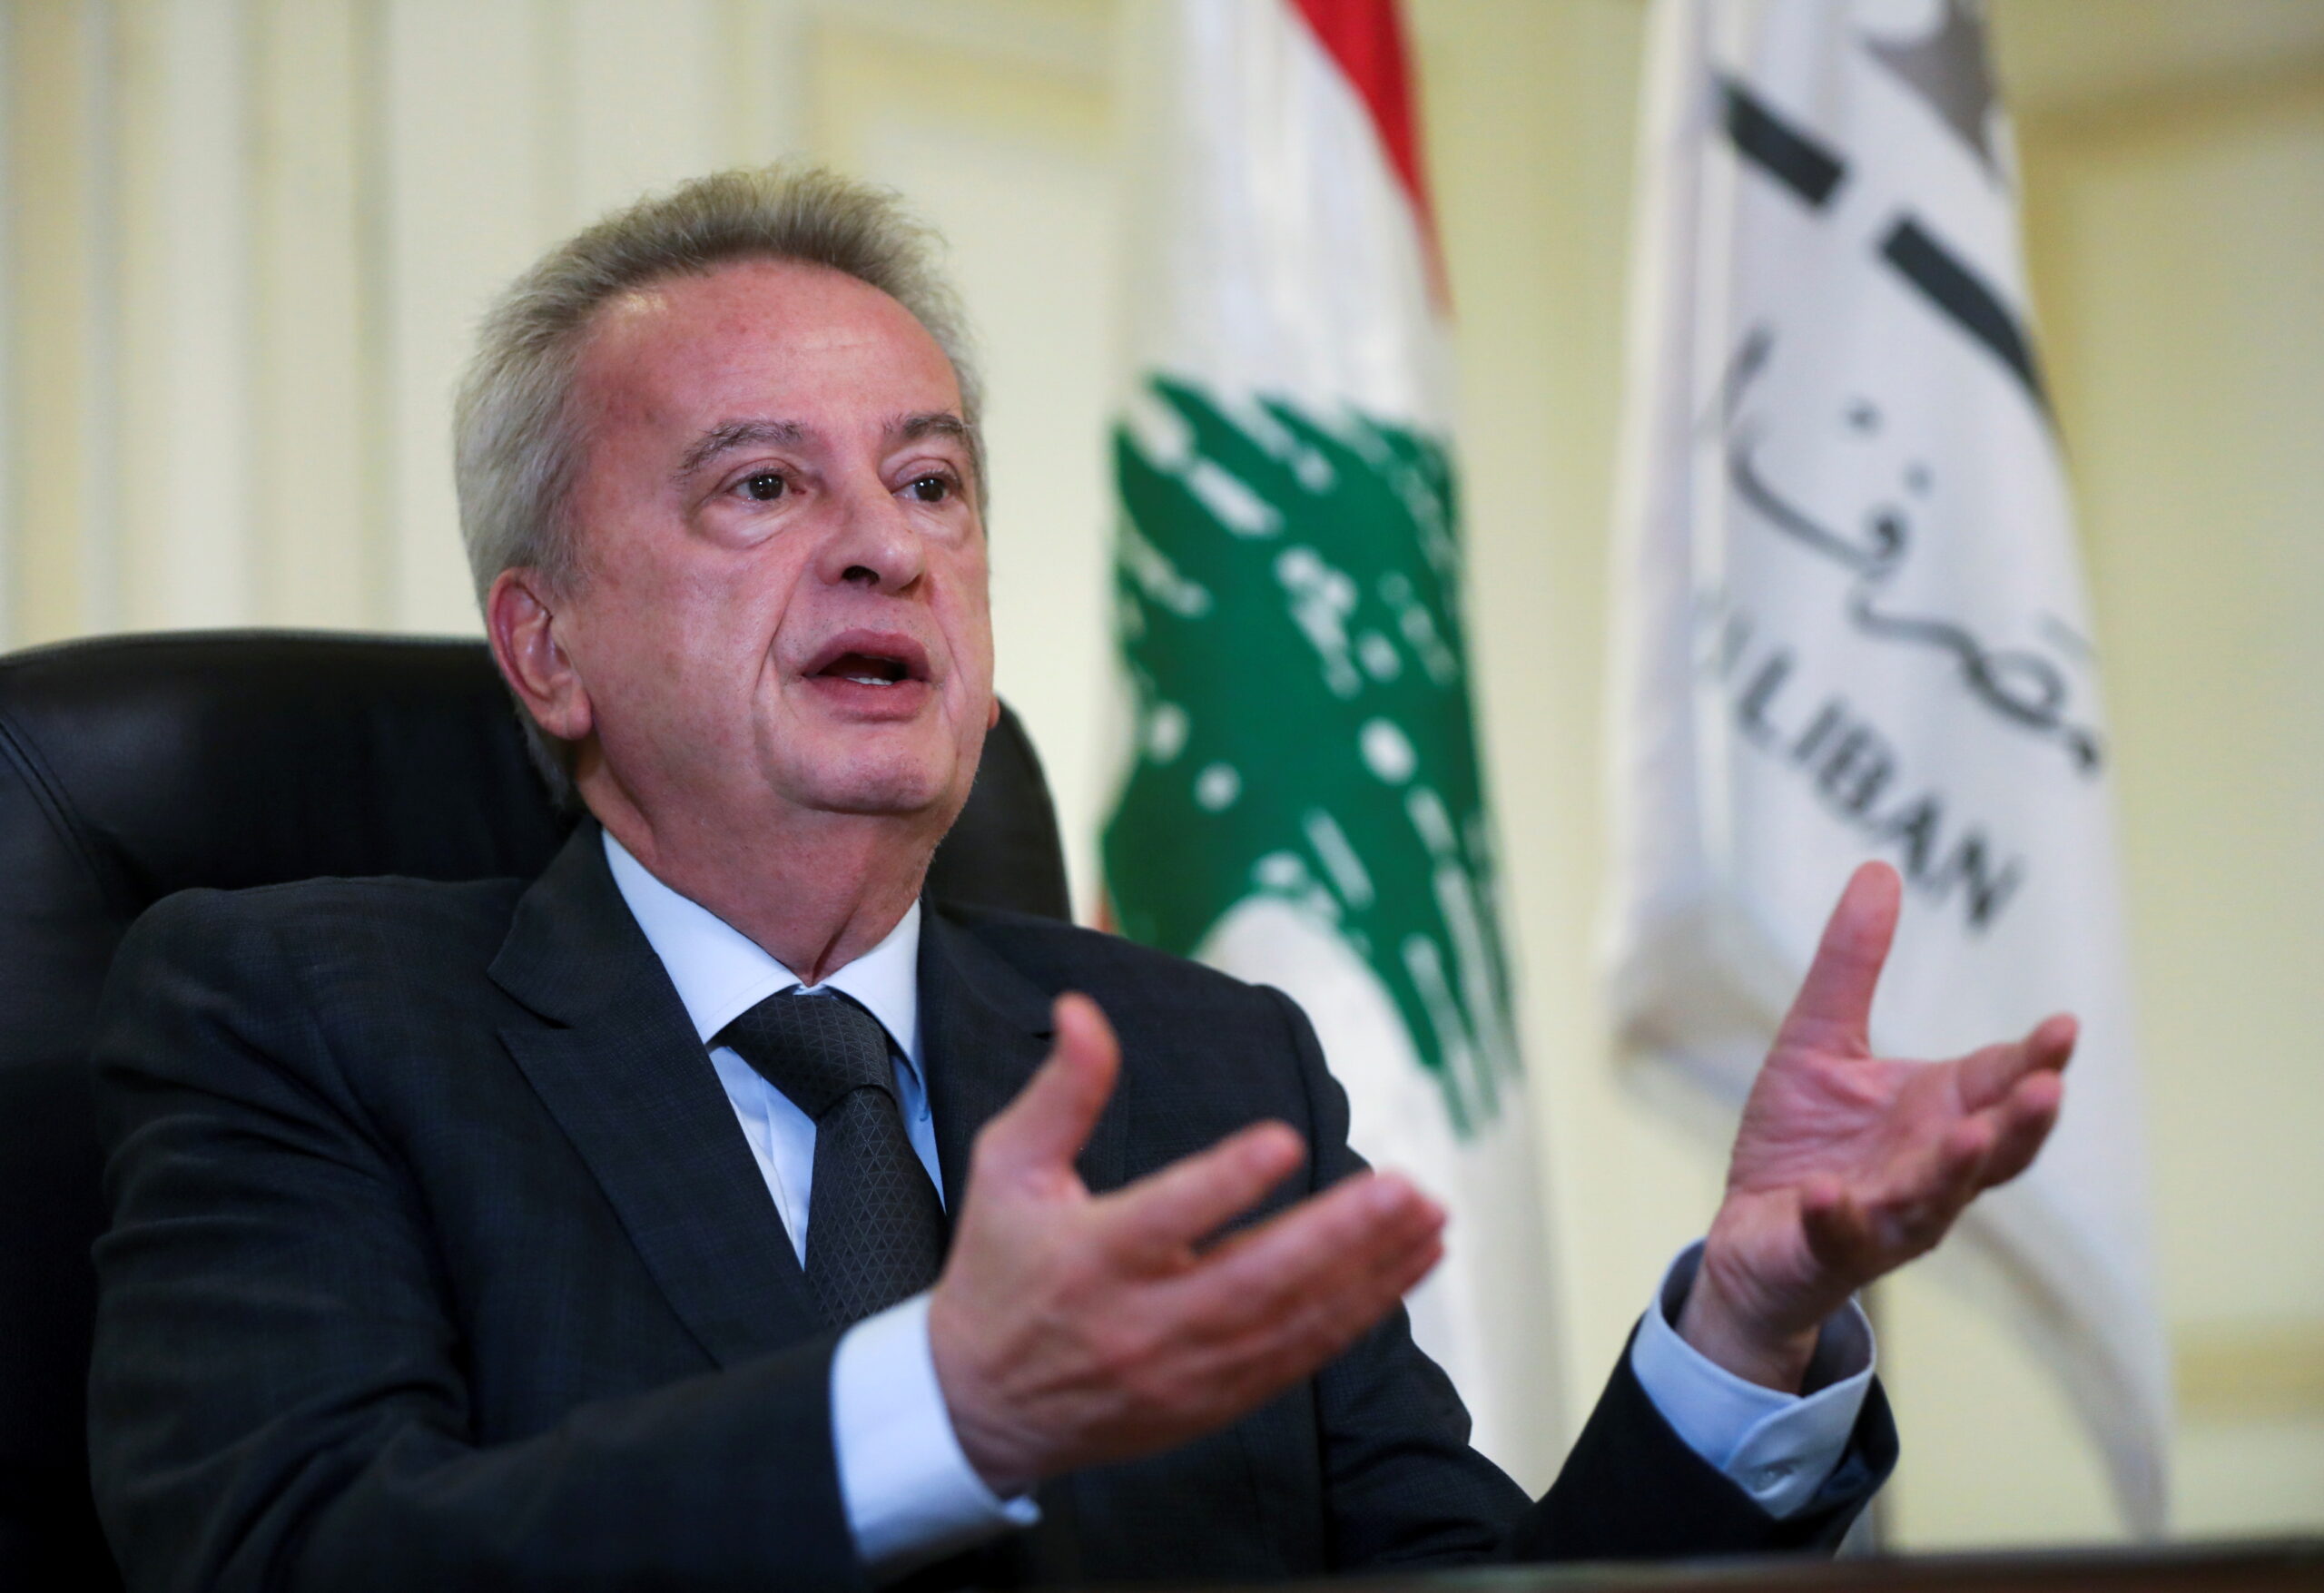 Lebanon’s Central Bank Governor Riad Salameh speaks during an interview in Beirut